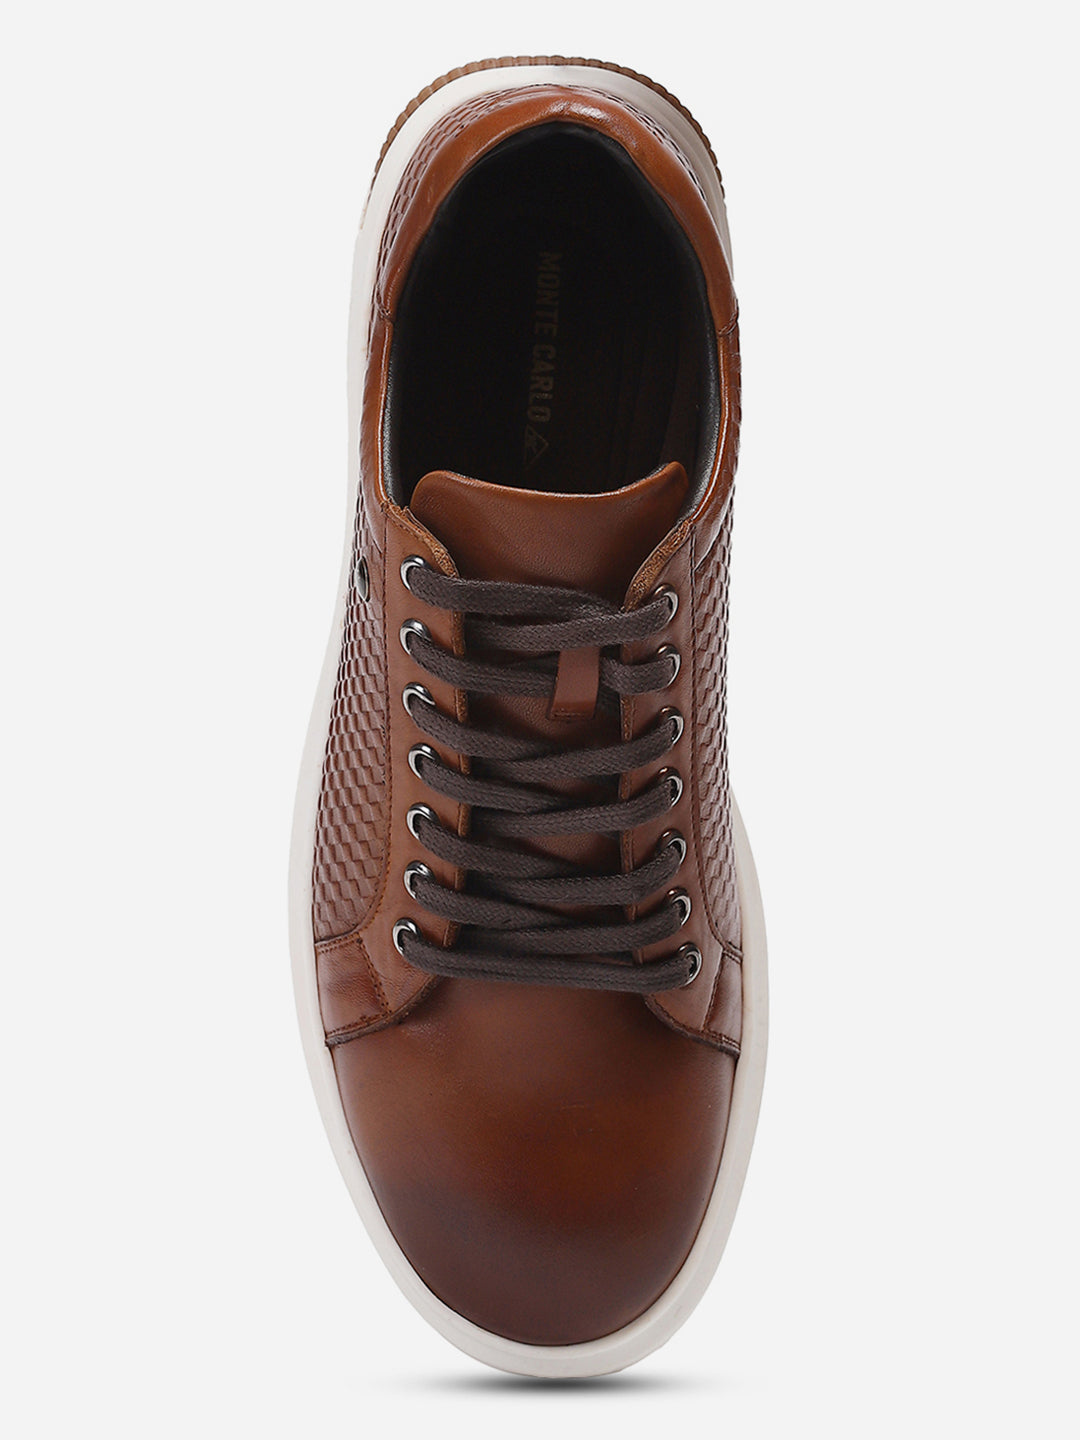 Mens Tan Solid Lace Up Genuine Leather Casual Sneaker